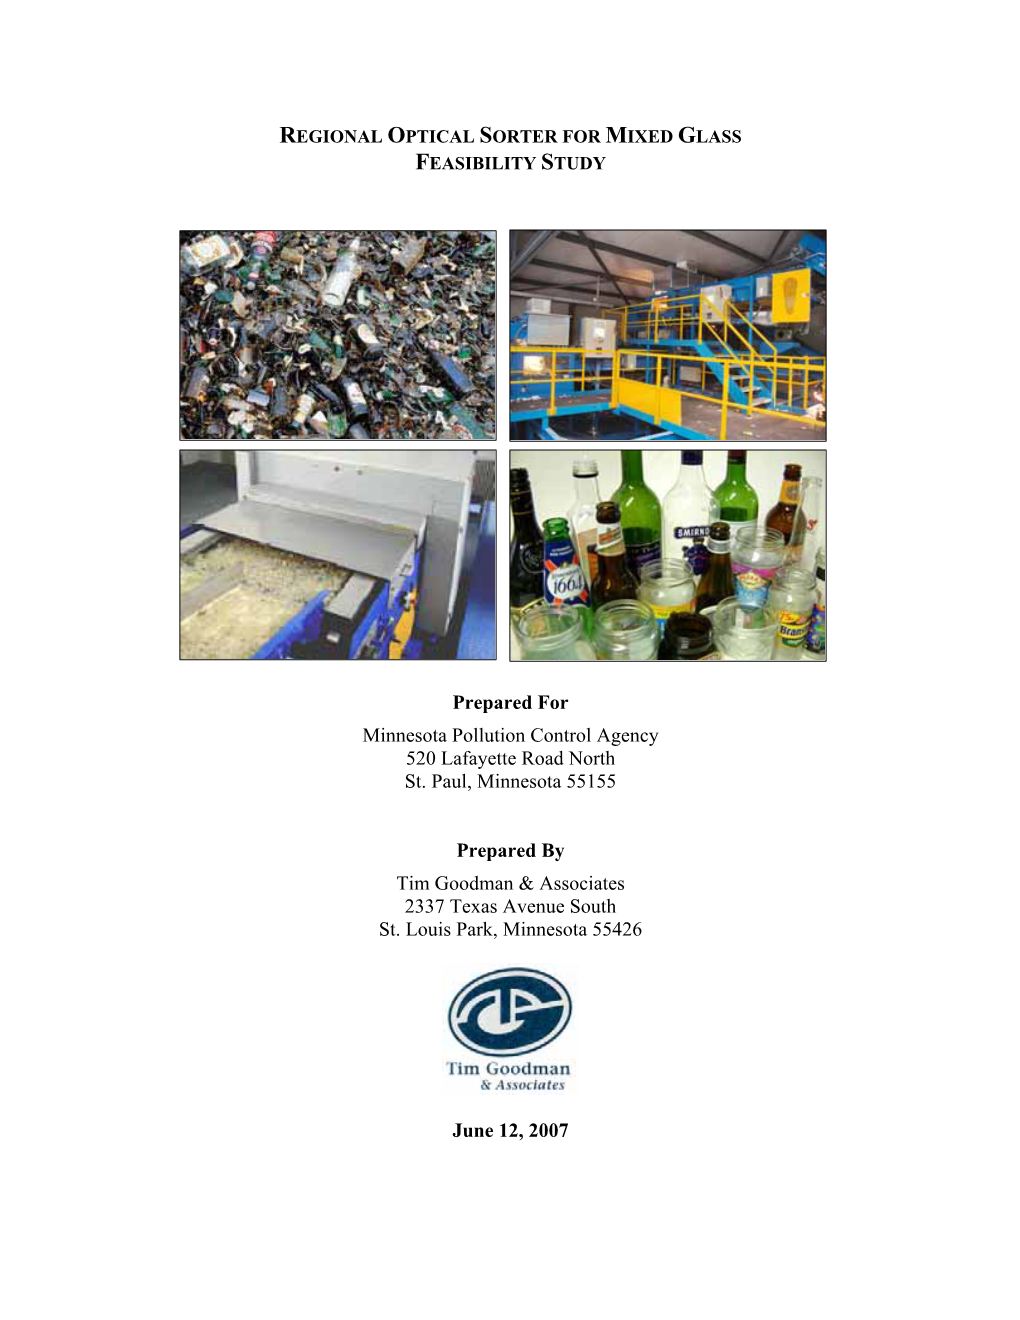 Feasibility Study: Regional Optical Sorter for Mixed Glass (June 2007)